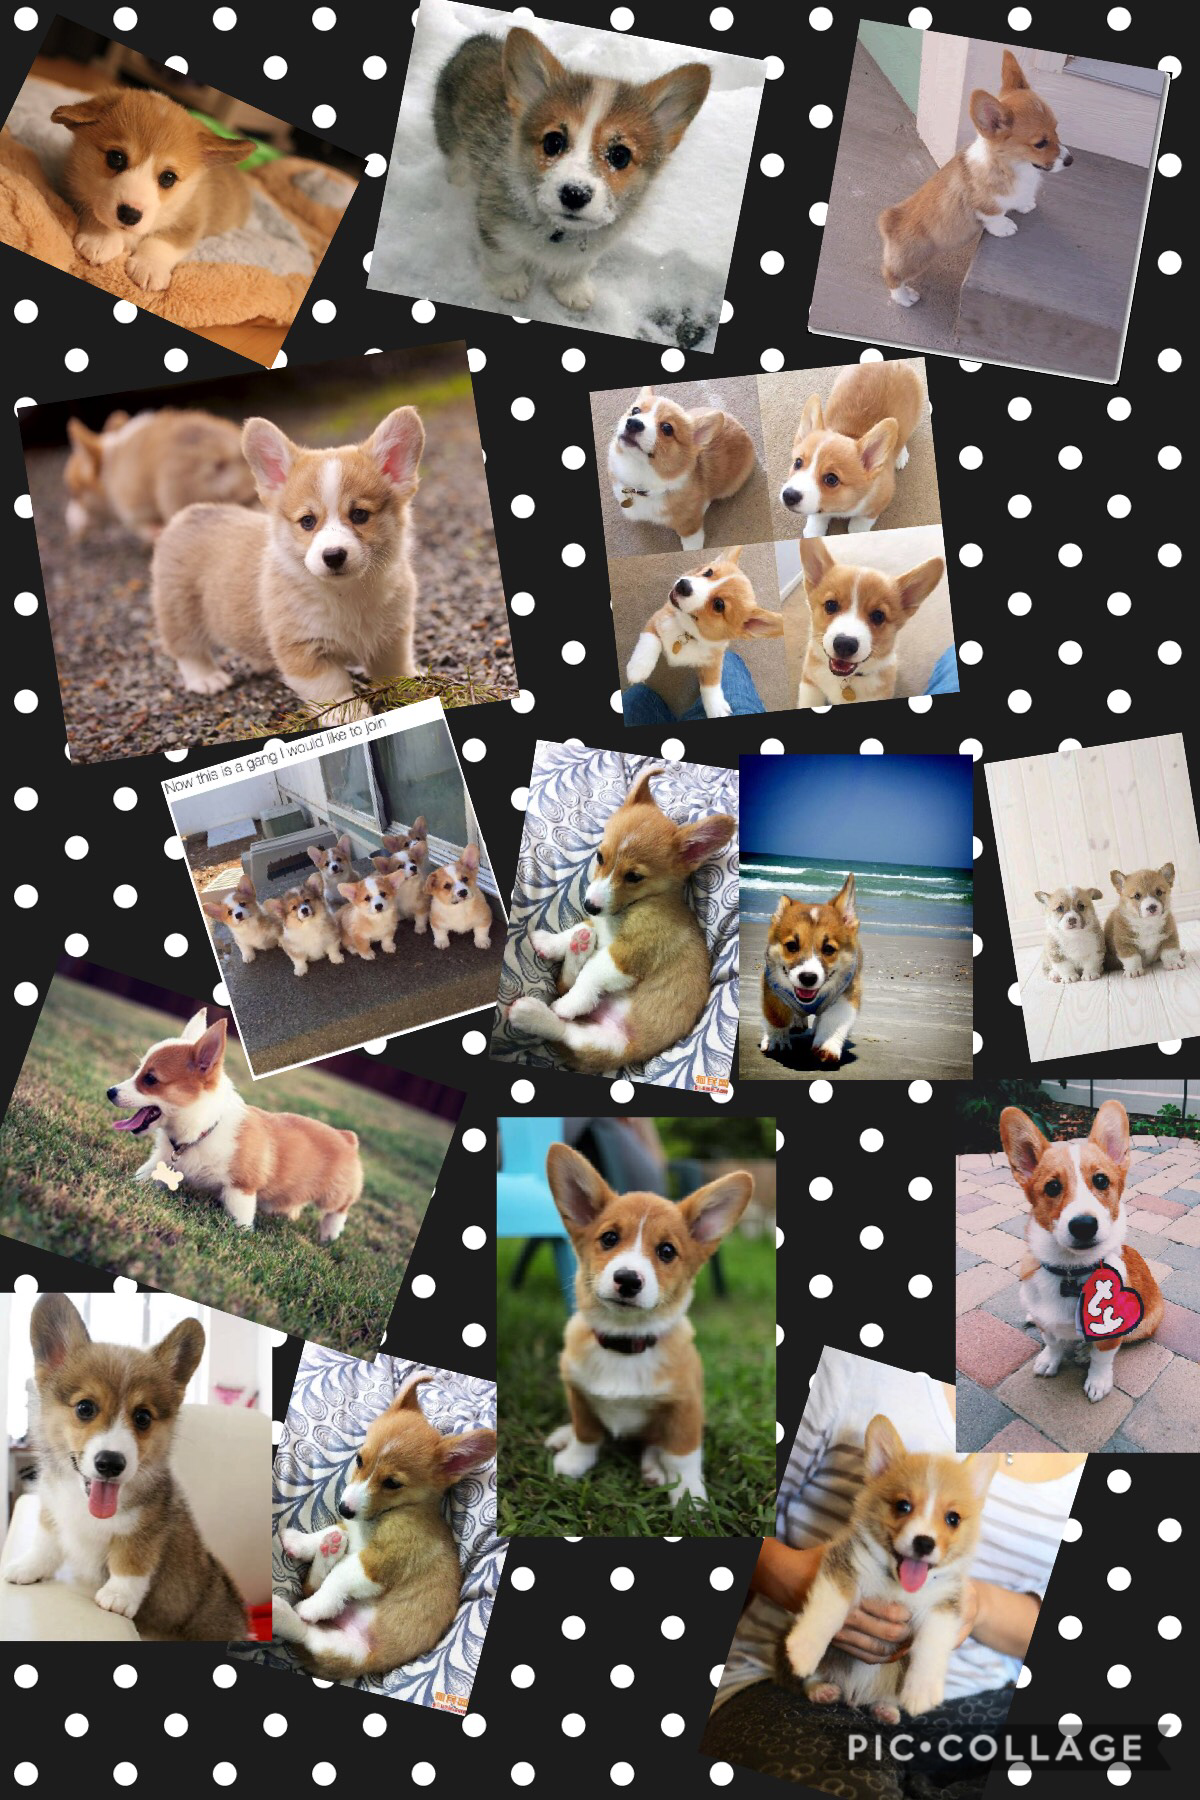 No one knows about corgis but they are adorbs 